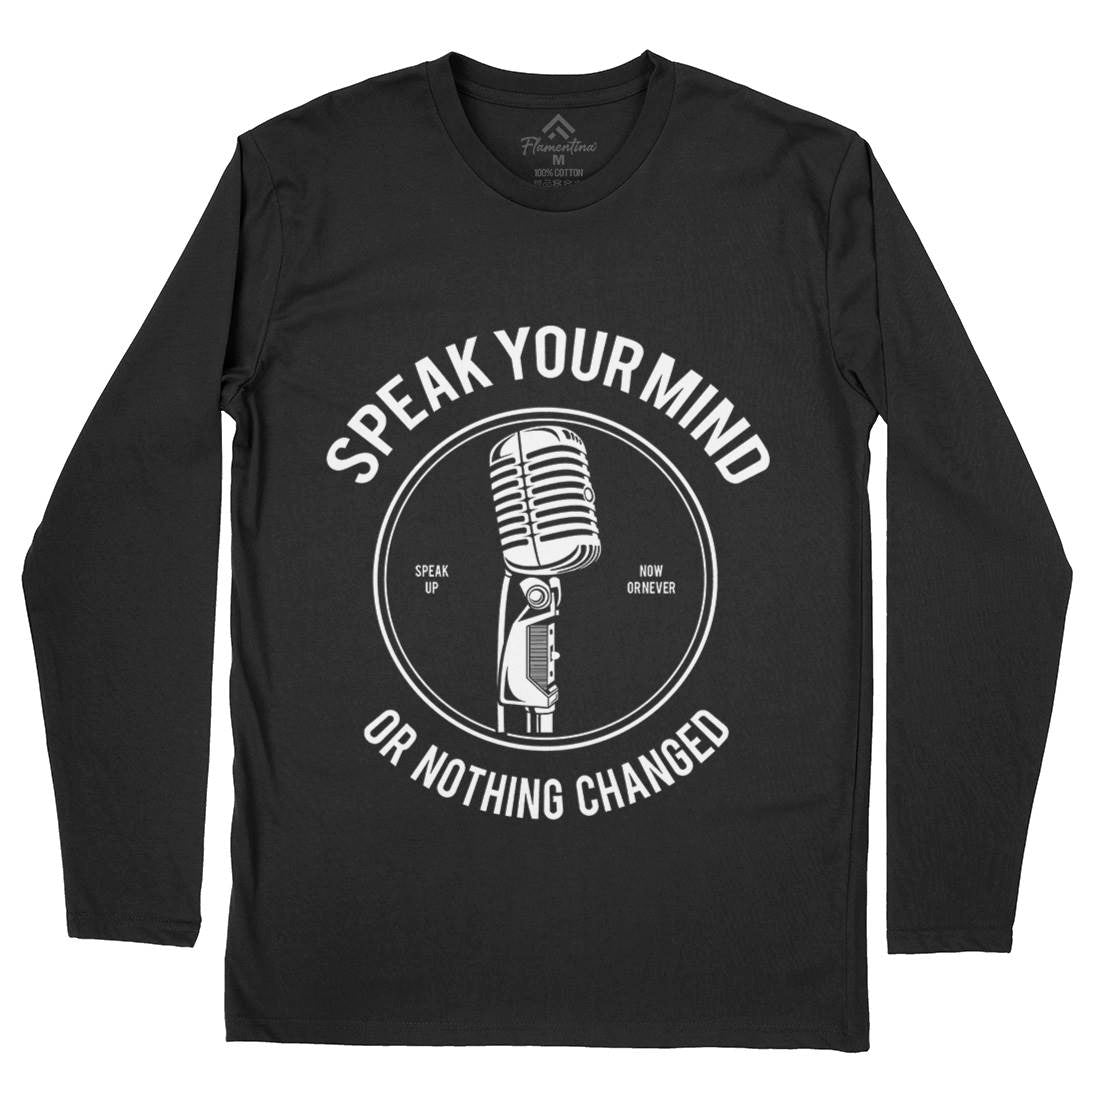 Speak Your Mind Mens Long Sleeve T-Shirt Quotes A152